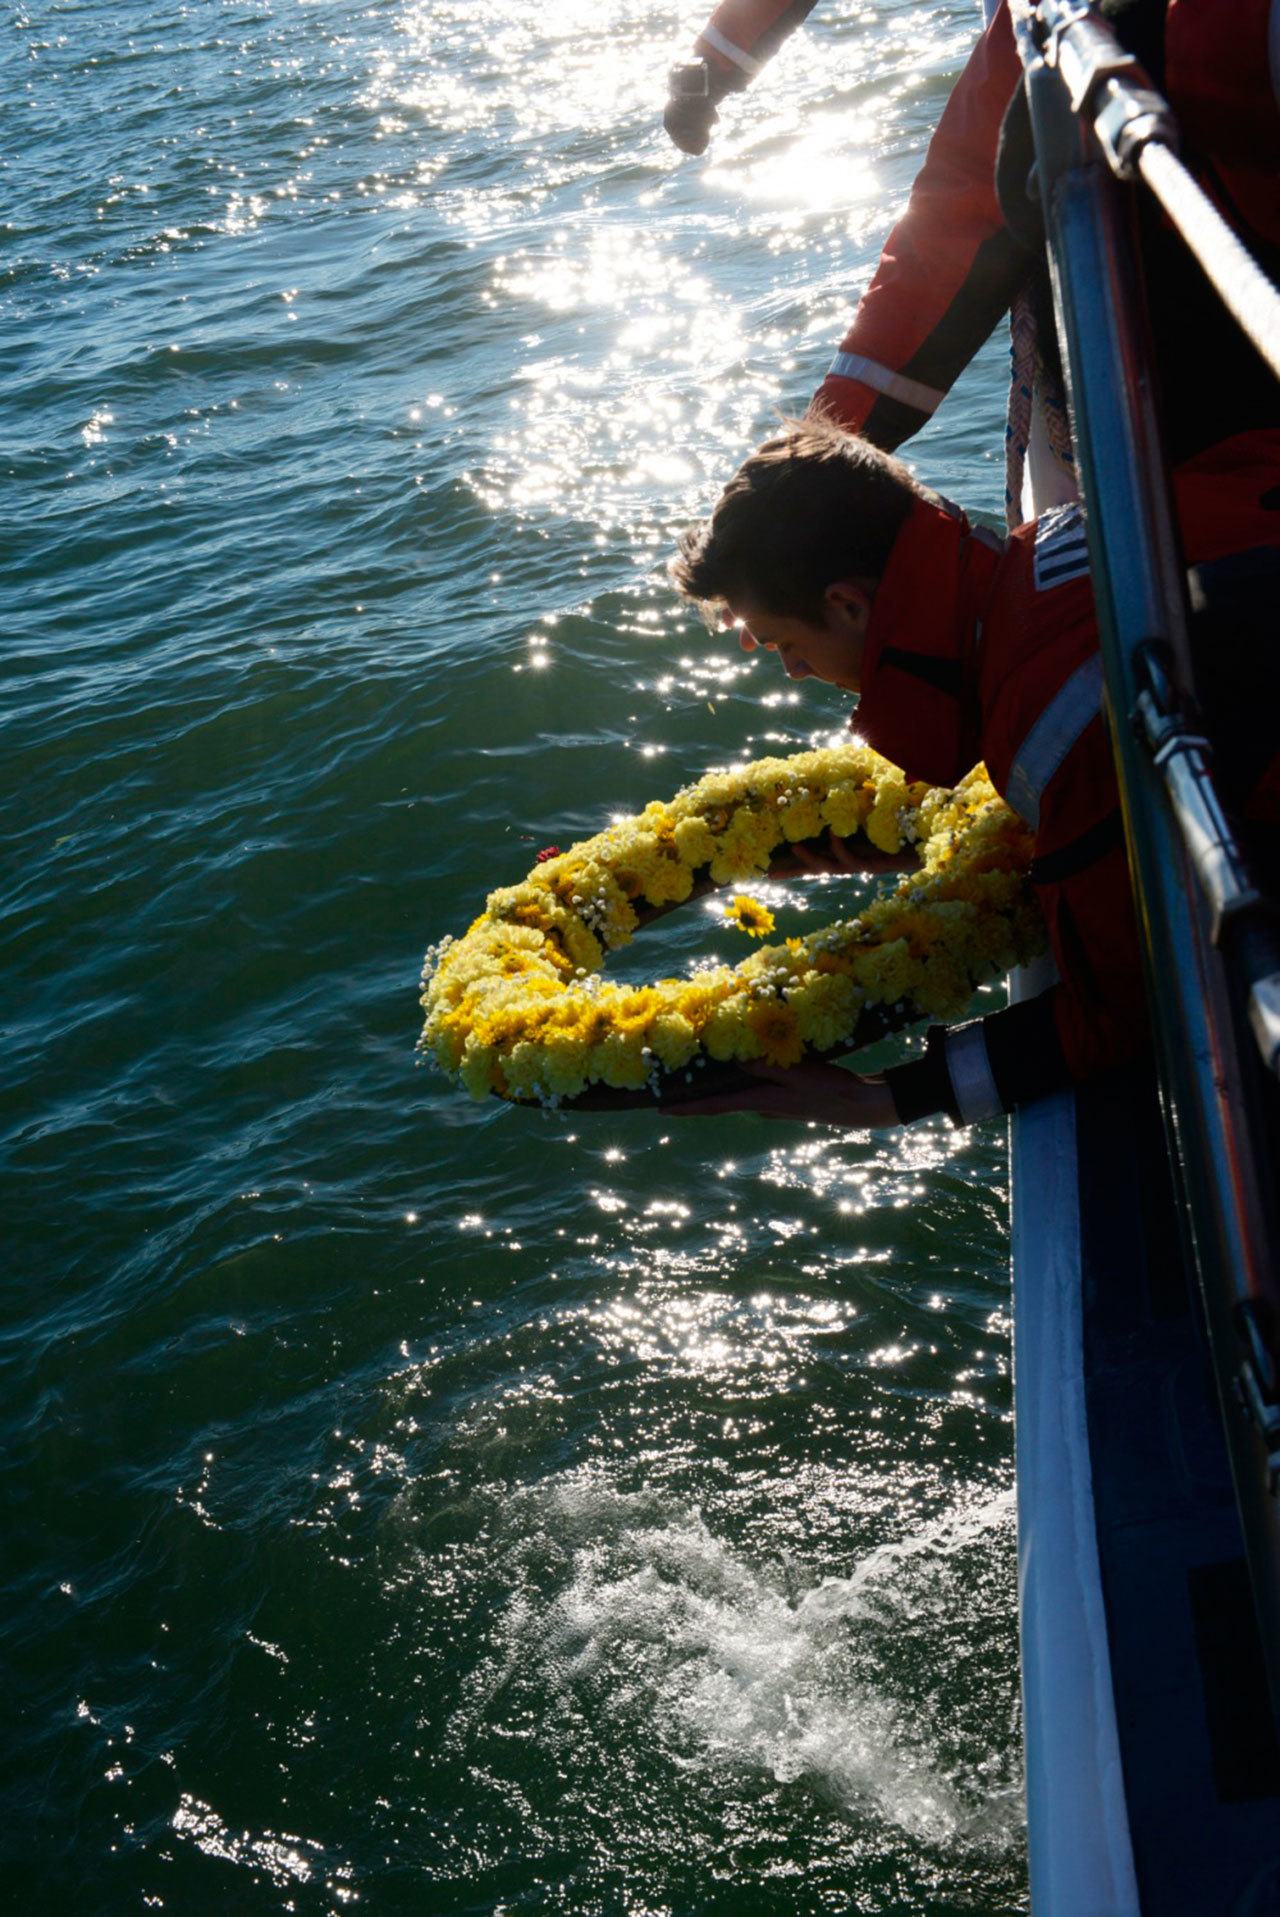 Boatswain’s Mate Third Class Austin Kettleson, from Coast Guard Station Cape Disappointment, places a memorial wreath into the Pacific Ocean near the North Head Light in Ilwaco during a memorial ceremony Saturday. (Kaitlin Florez/U.S. Coast Guard)